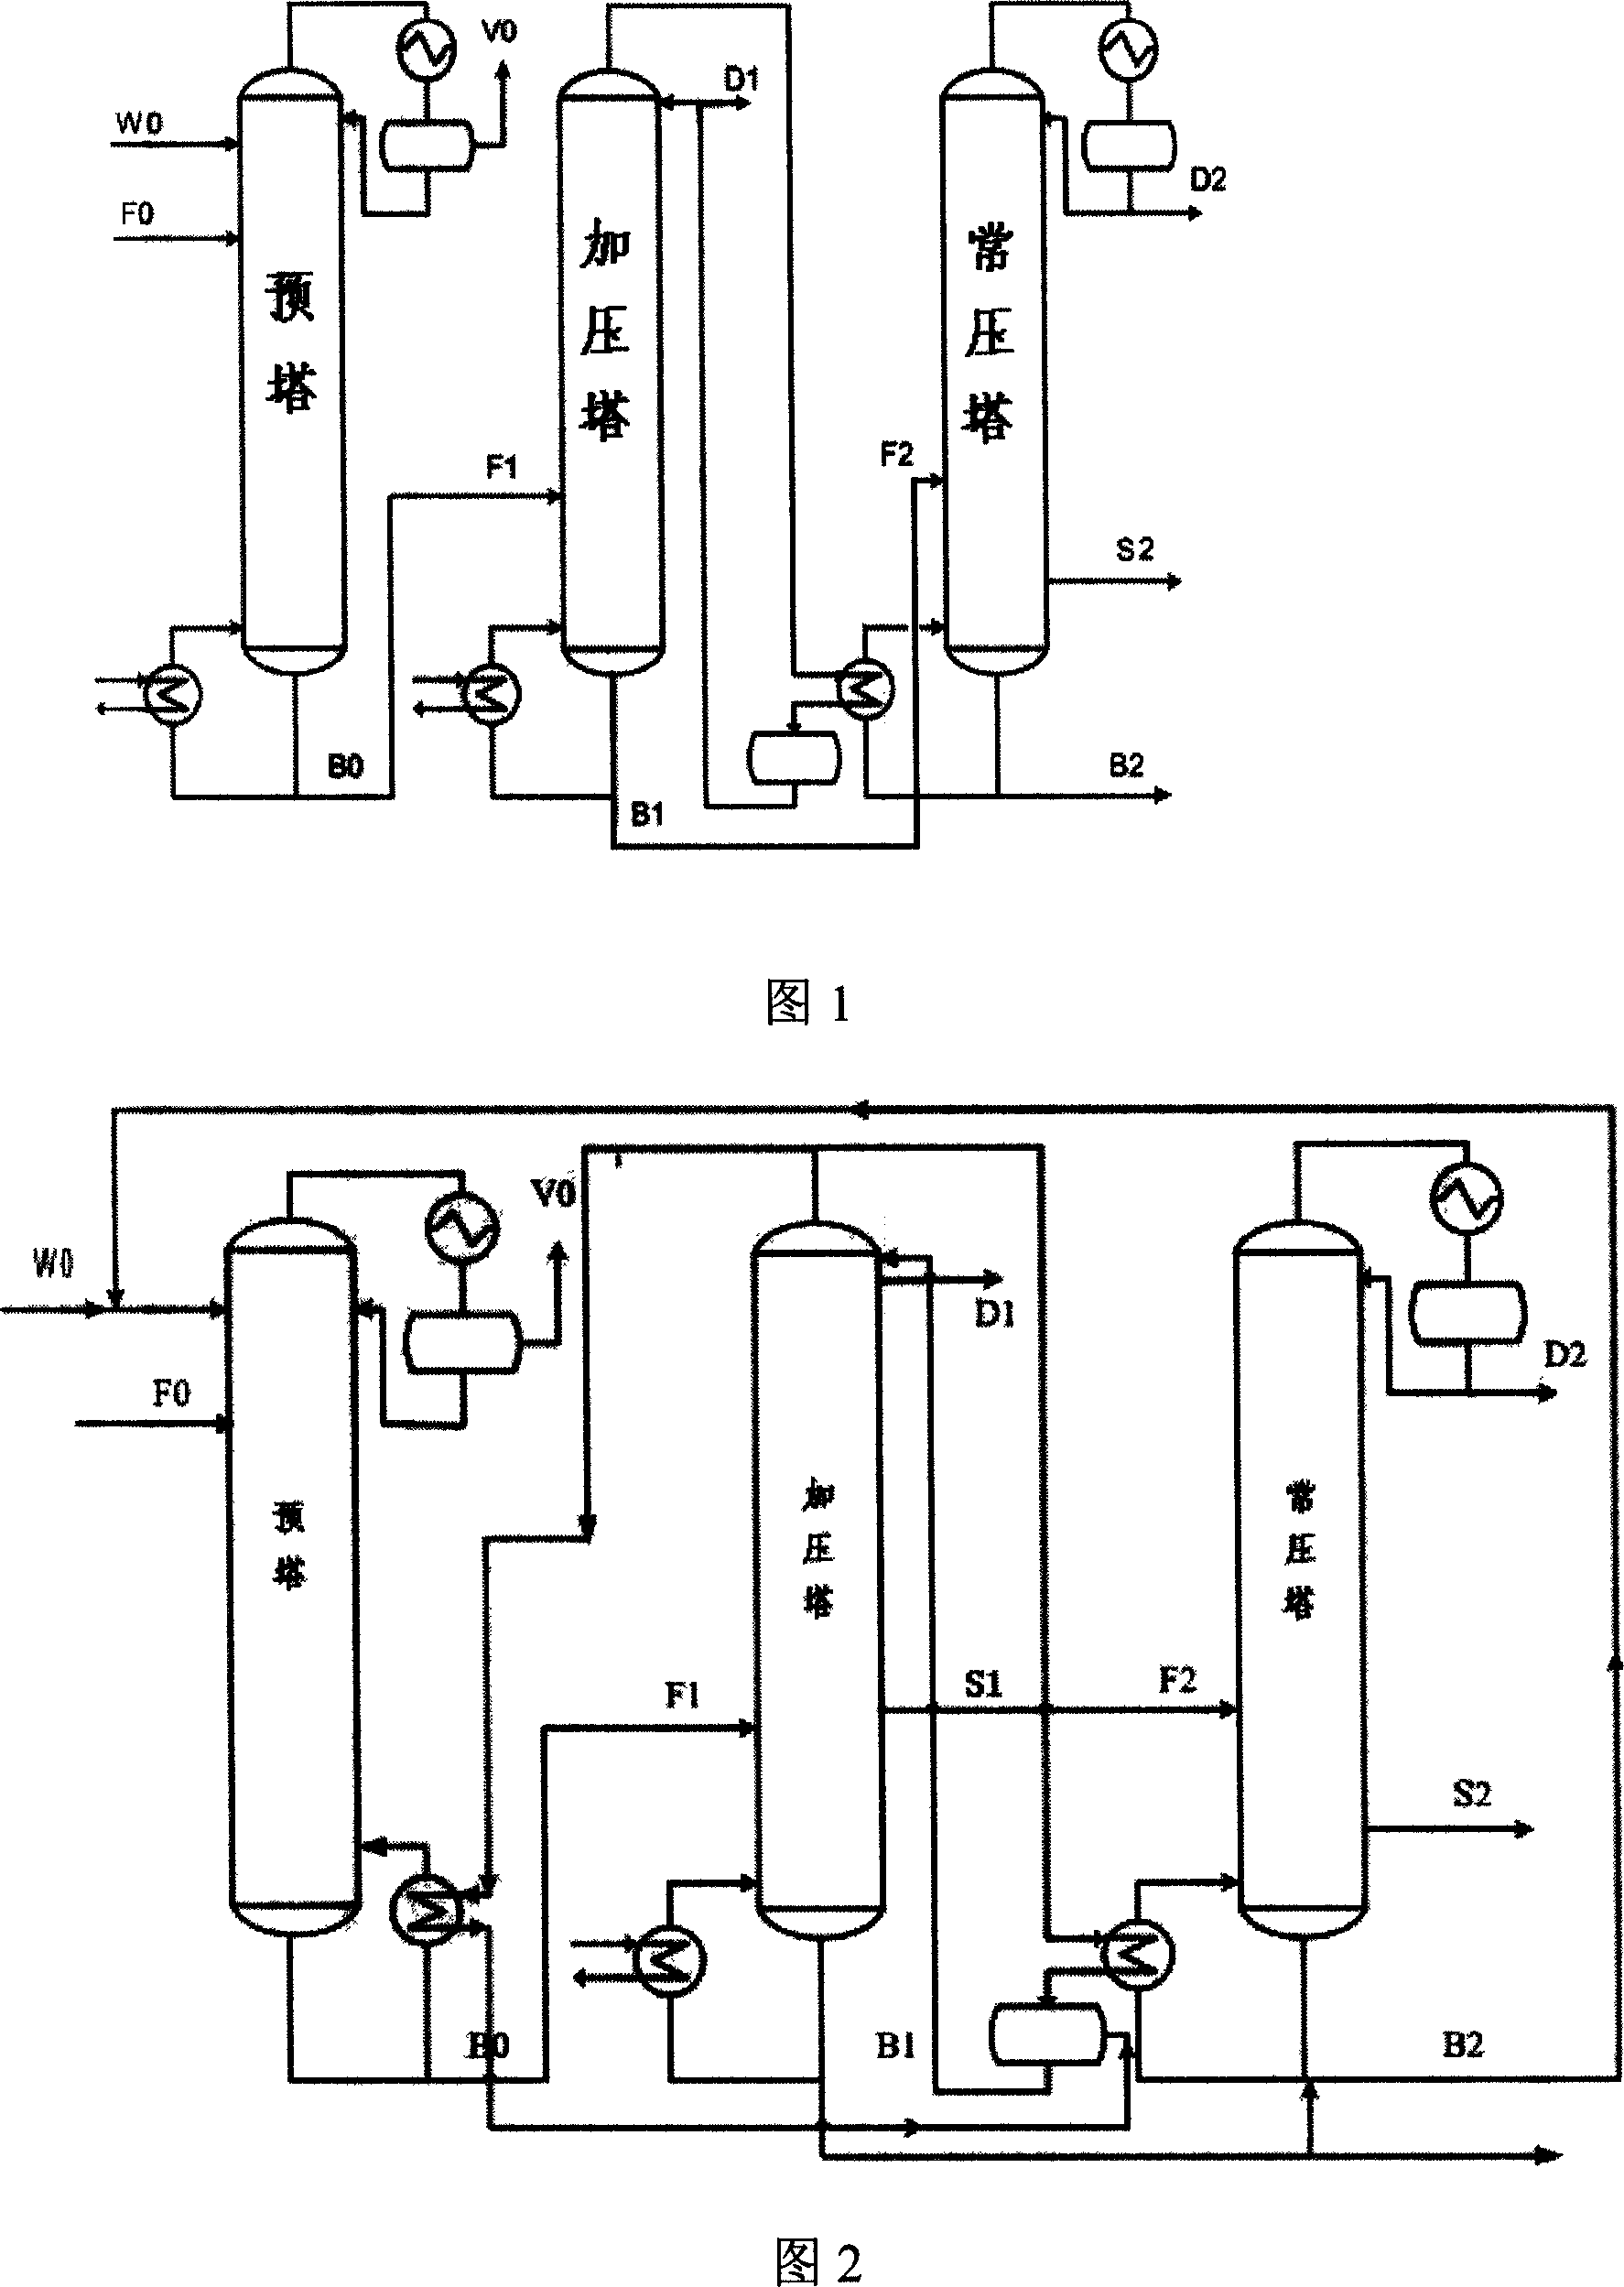 Method of refining synthetic methanol with heat integration